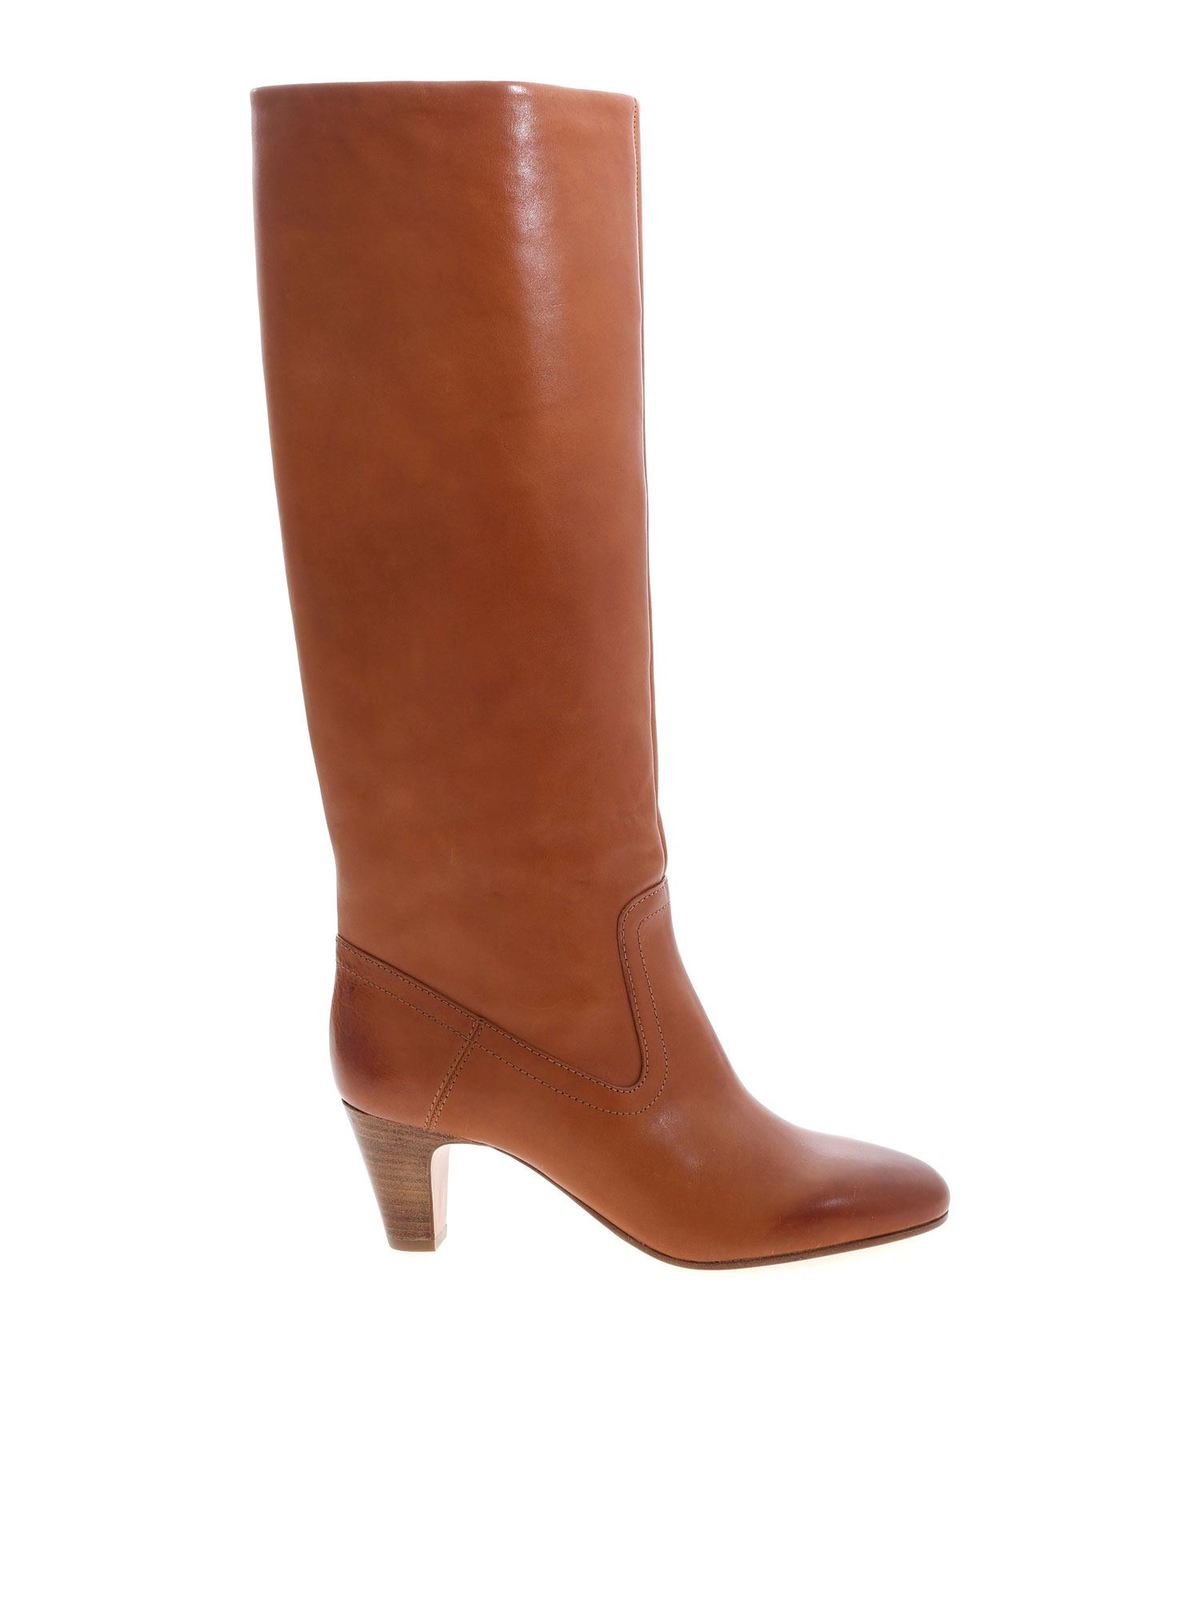 camel colored leather boots